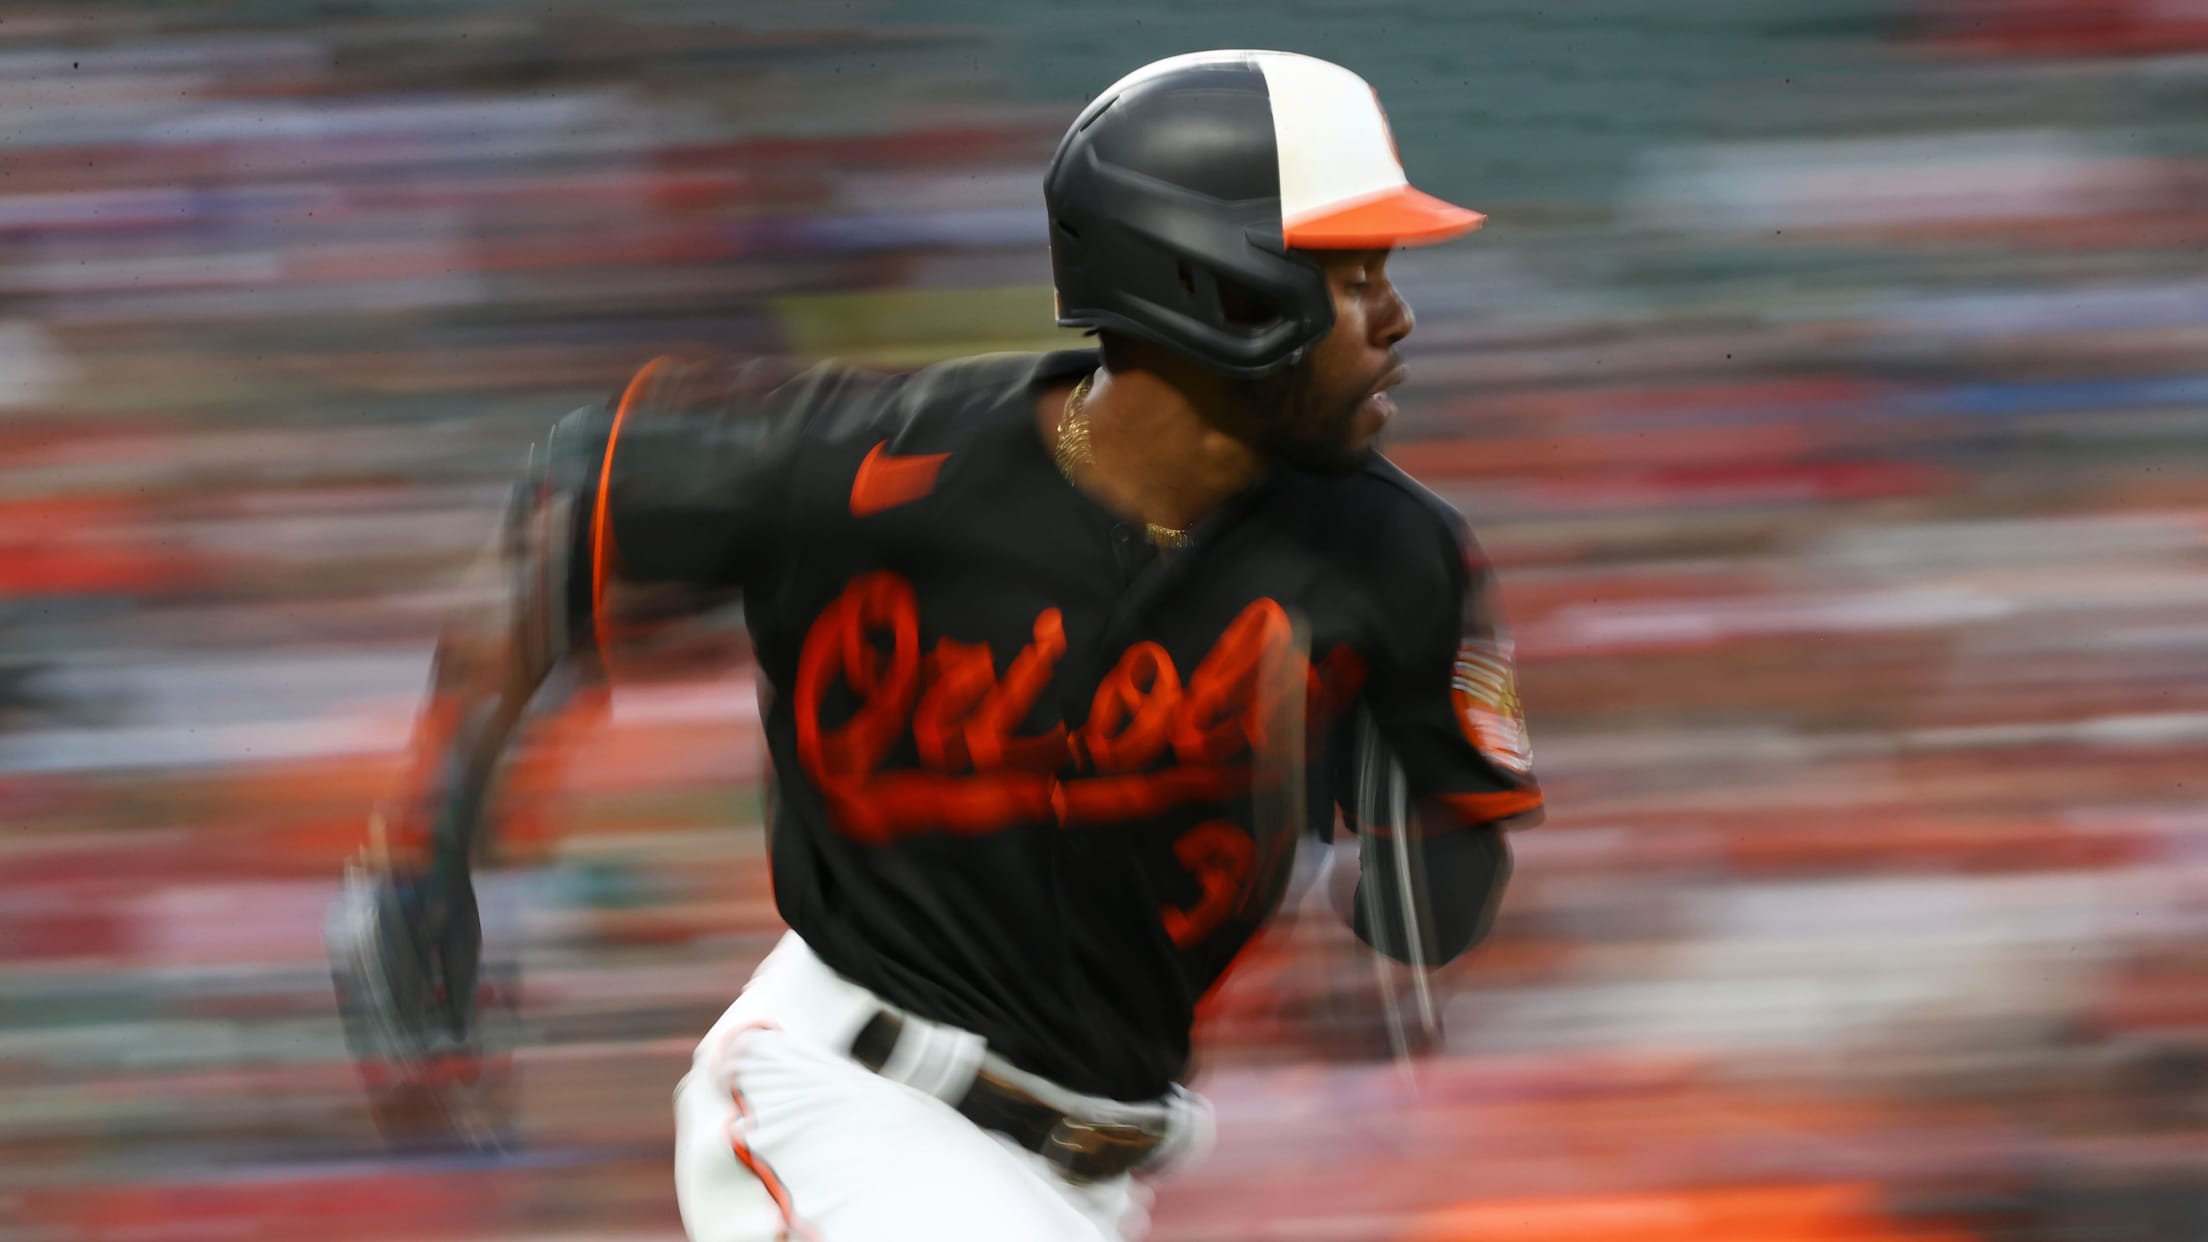 Cedric Mullins named Most Valuable Oriole for 2021 season - Camden Chat